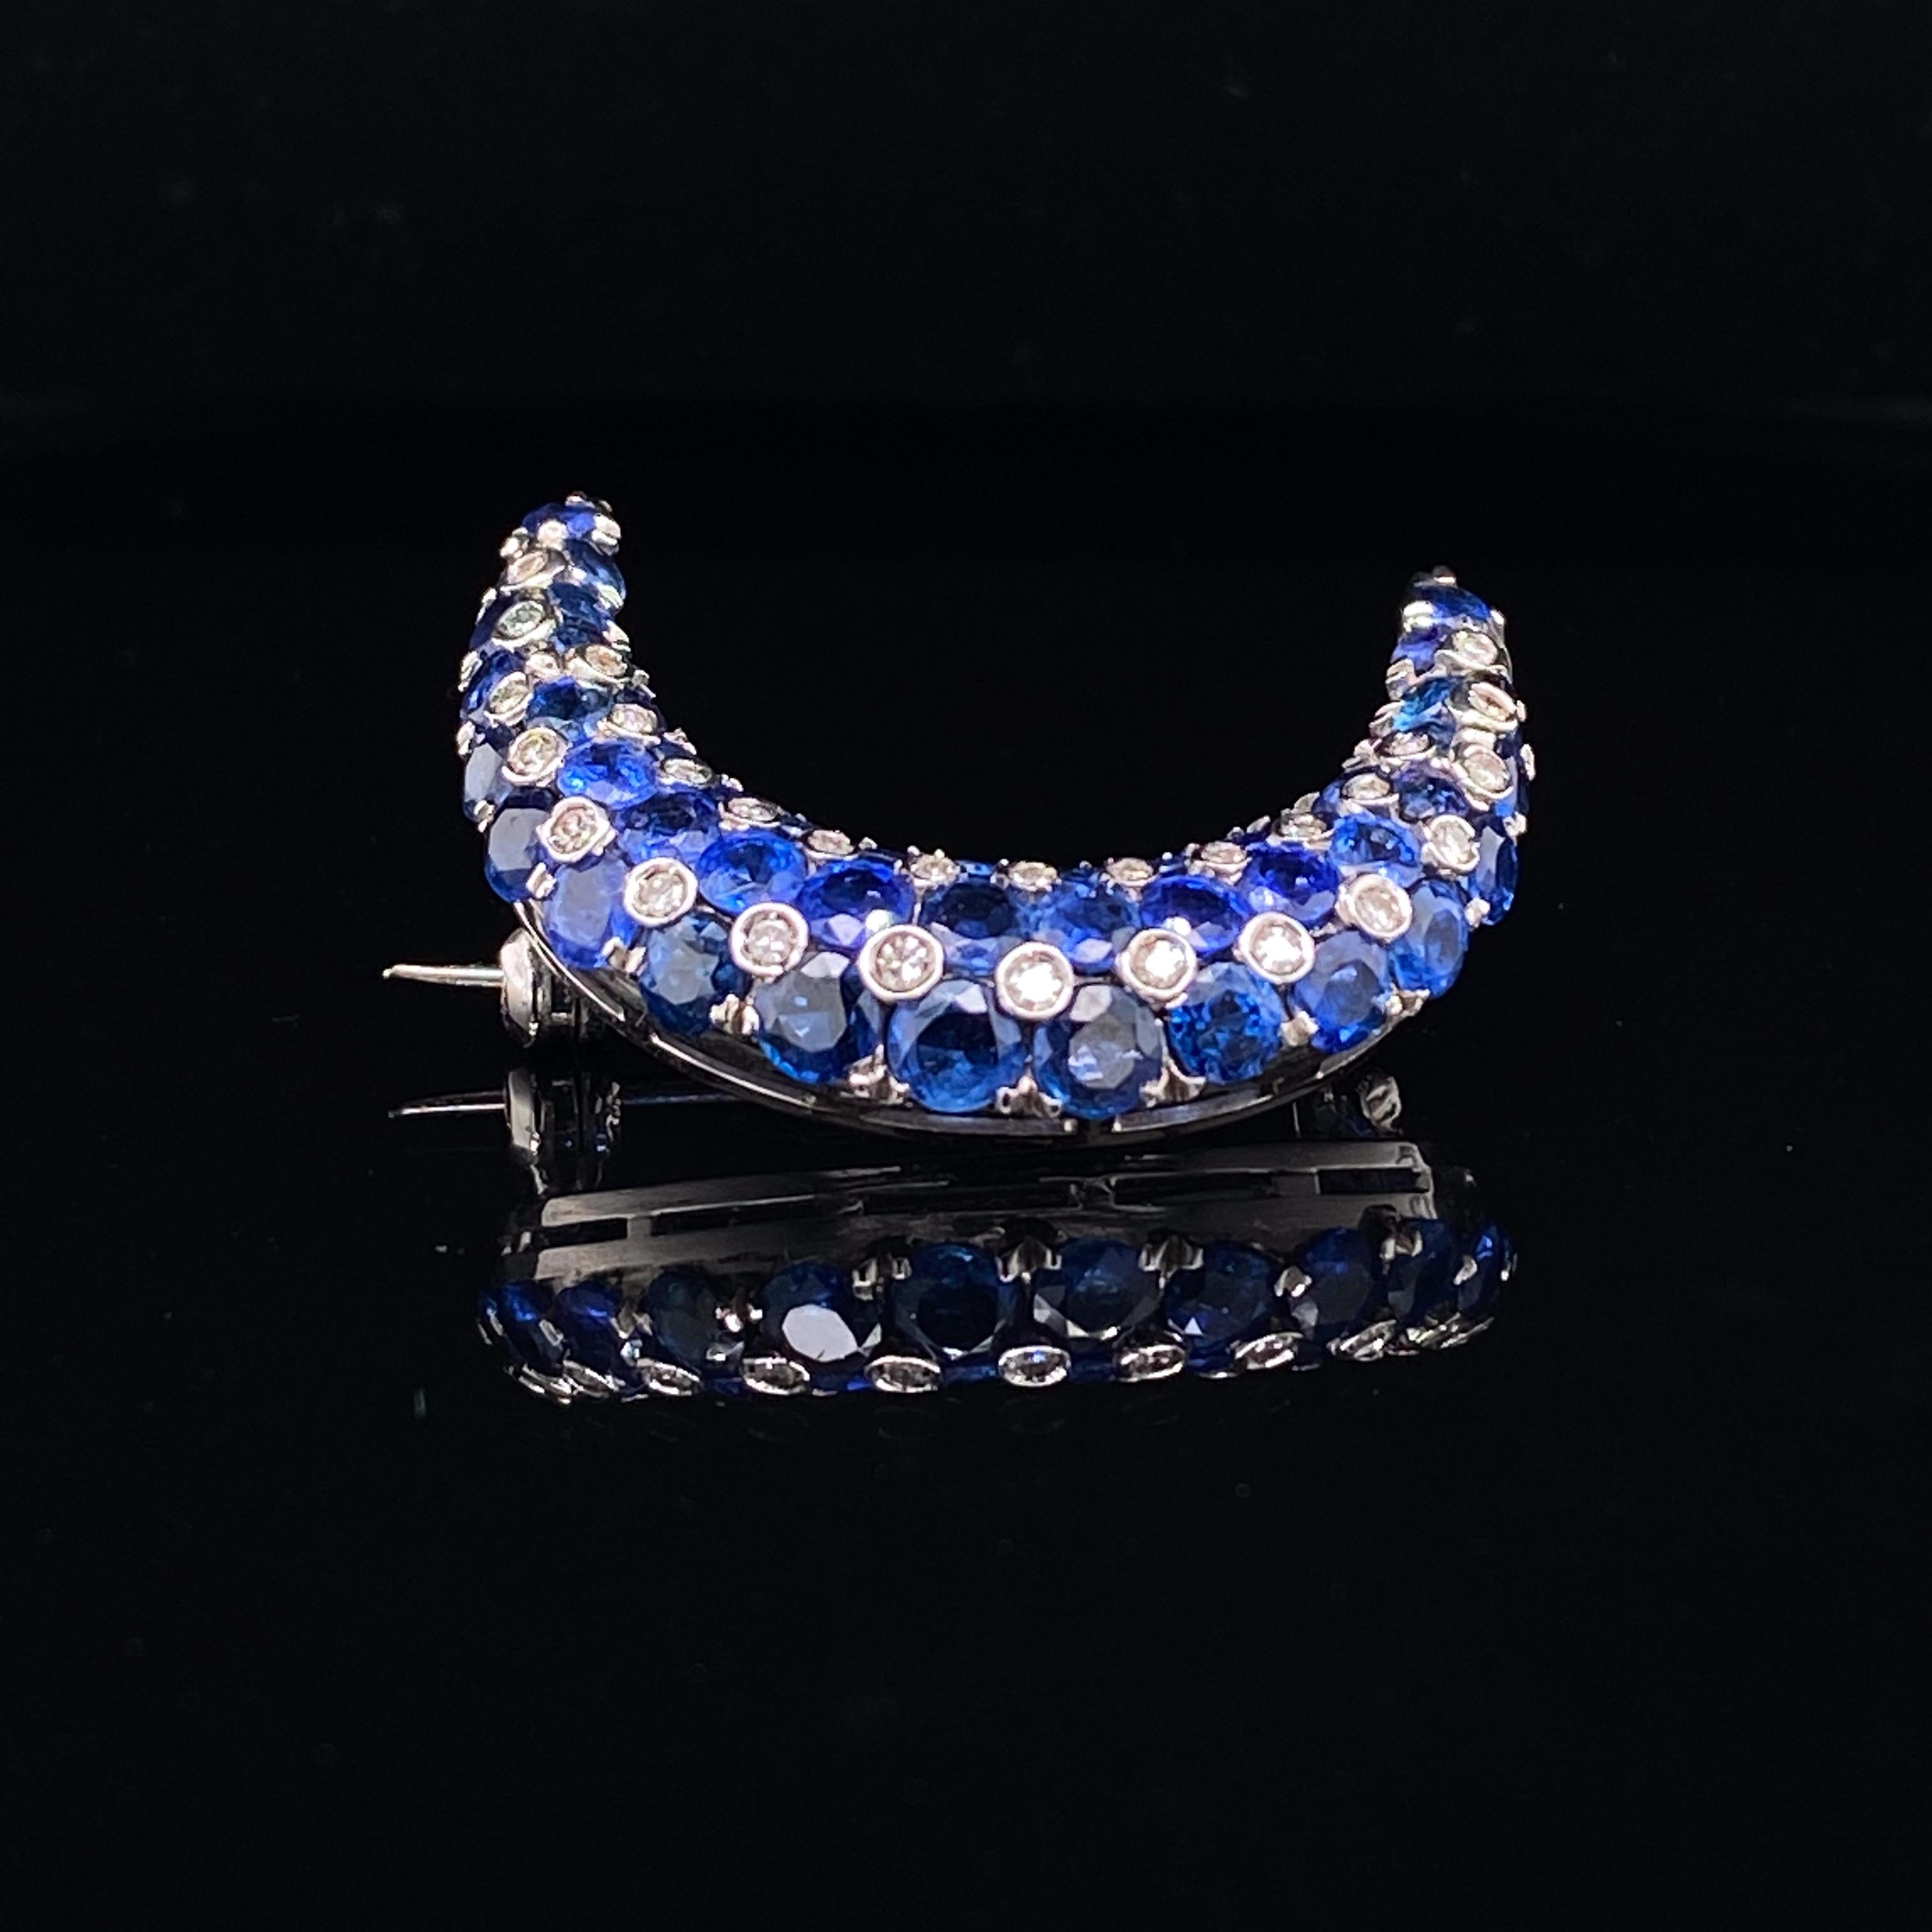 Tiffany & Co sapphire and diamond 18 karat white gold crescent moon brooch circa 1960.

This eye catching retro Tiffany & Co crescent moon shaped brooch is set with excellent mystery set royal blue sapphires and accented by claw set single cut